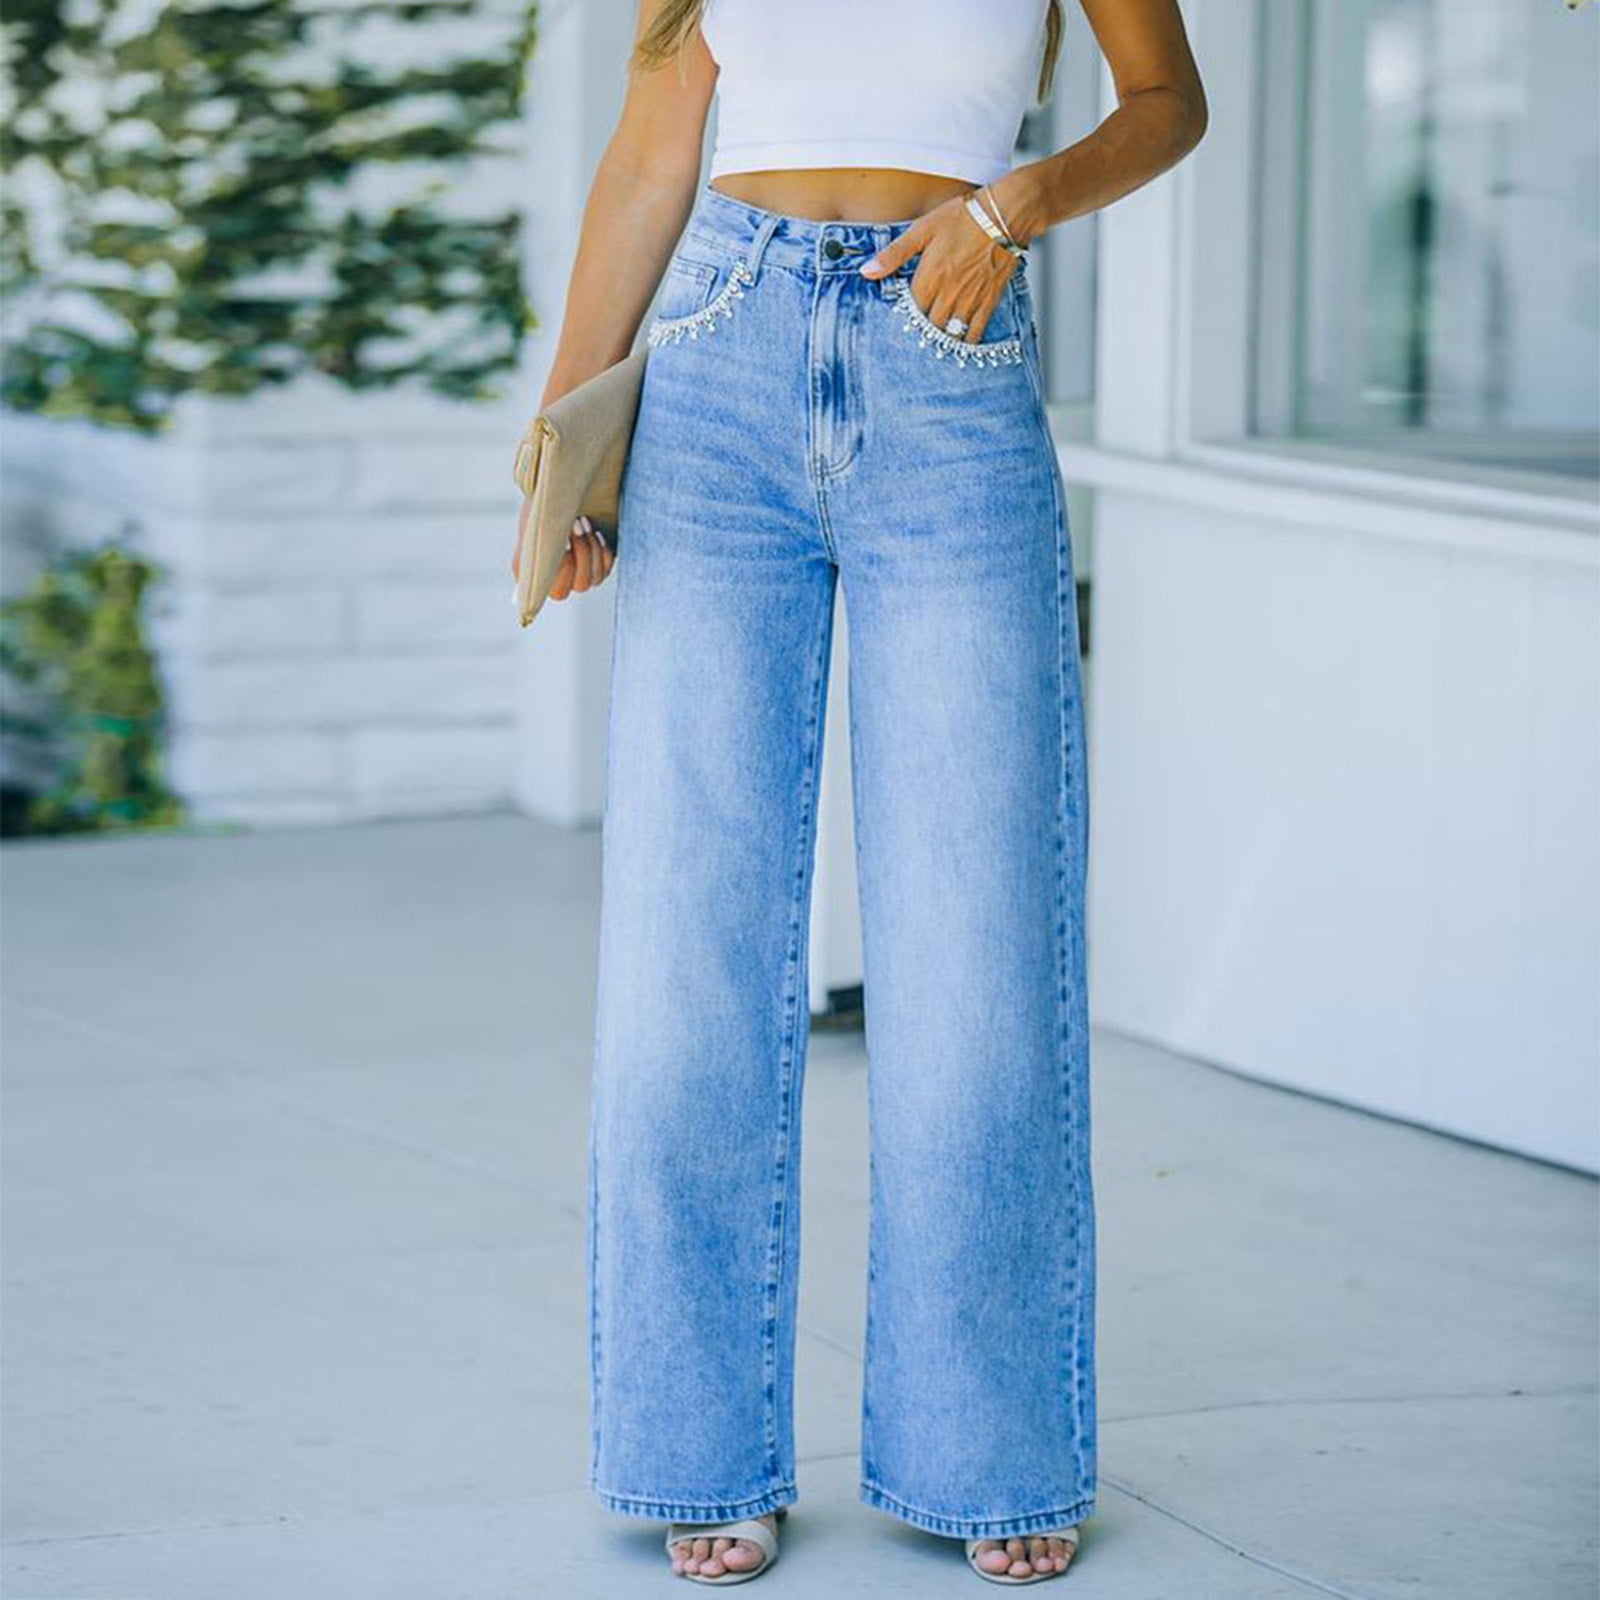 How To Wear High Waisted Pants & Jeans - 21 Dos and Don'ts | How to wear  belts, High wasted jeans outfit, How to wear high waisted jeans